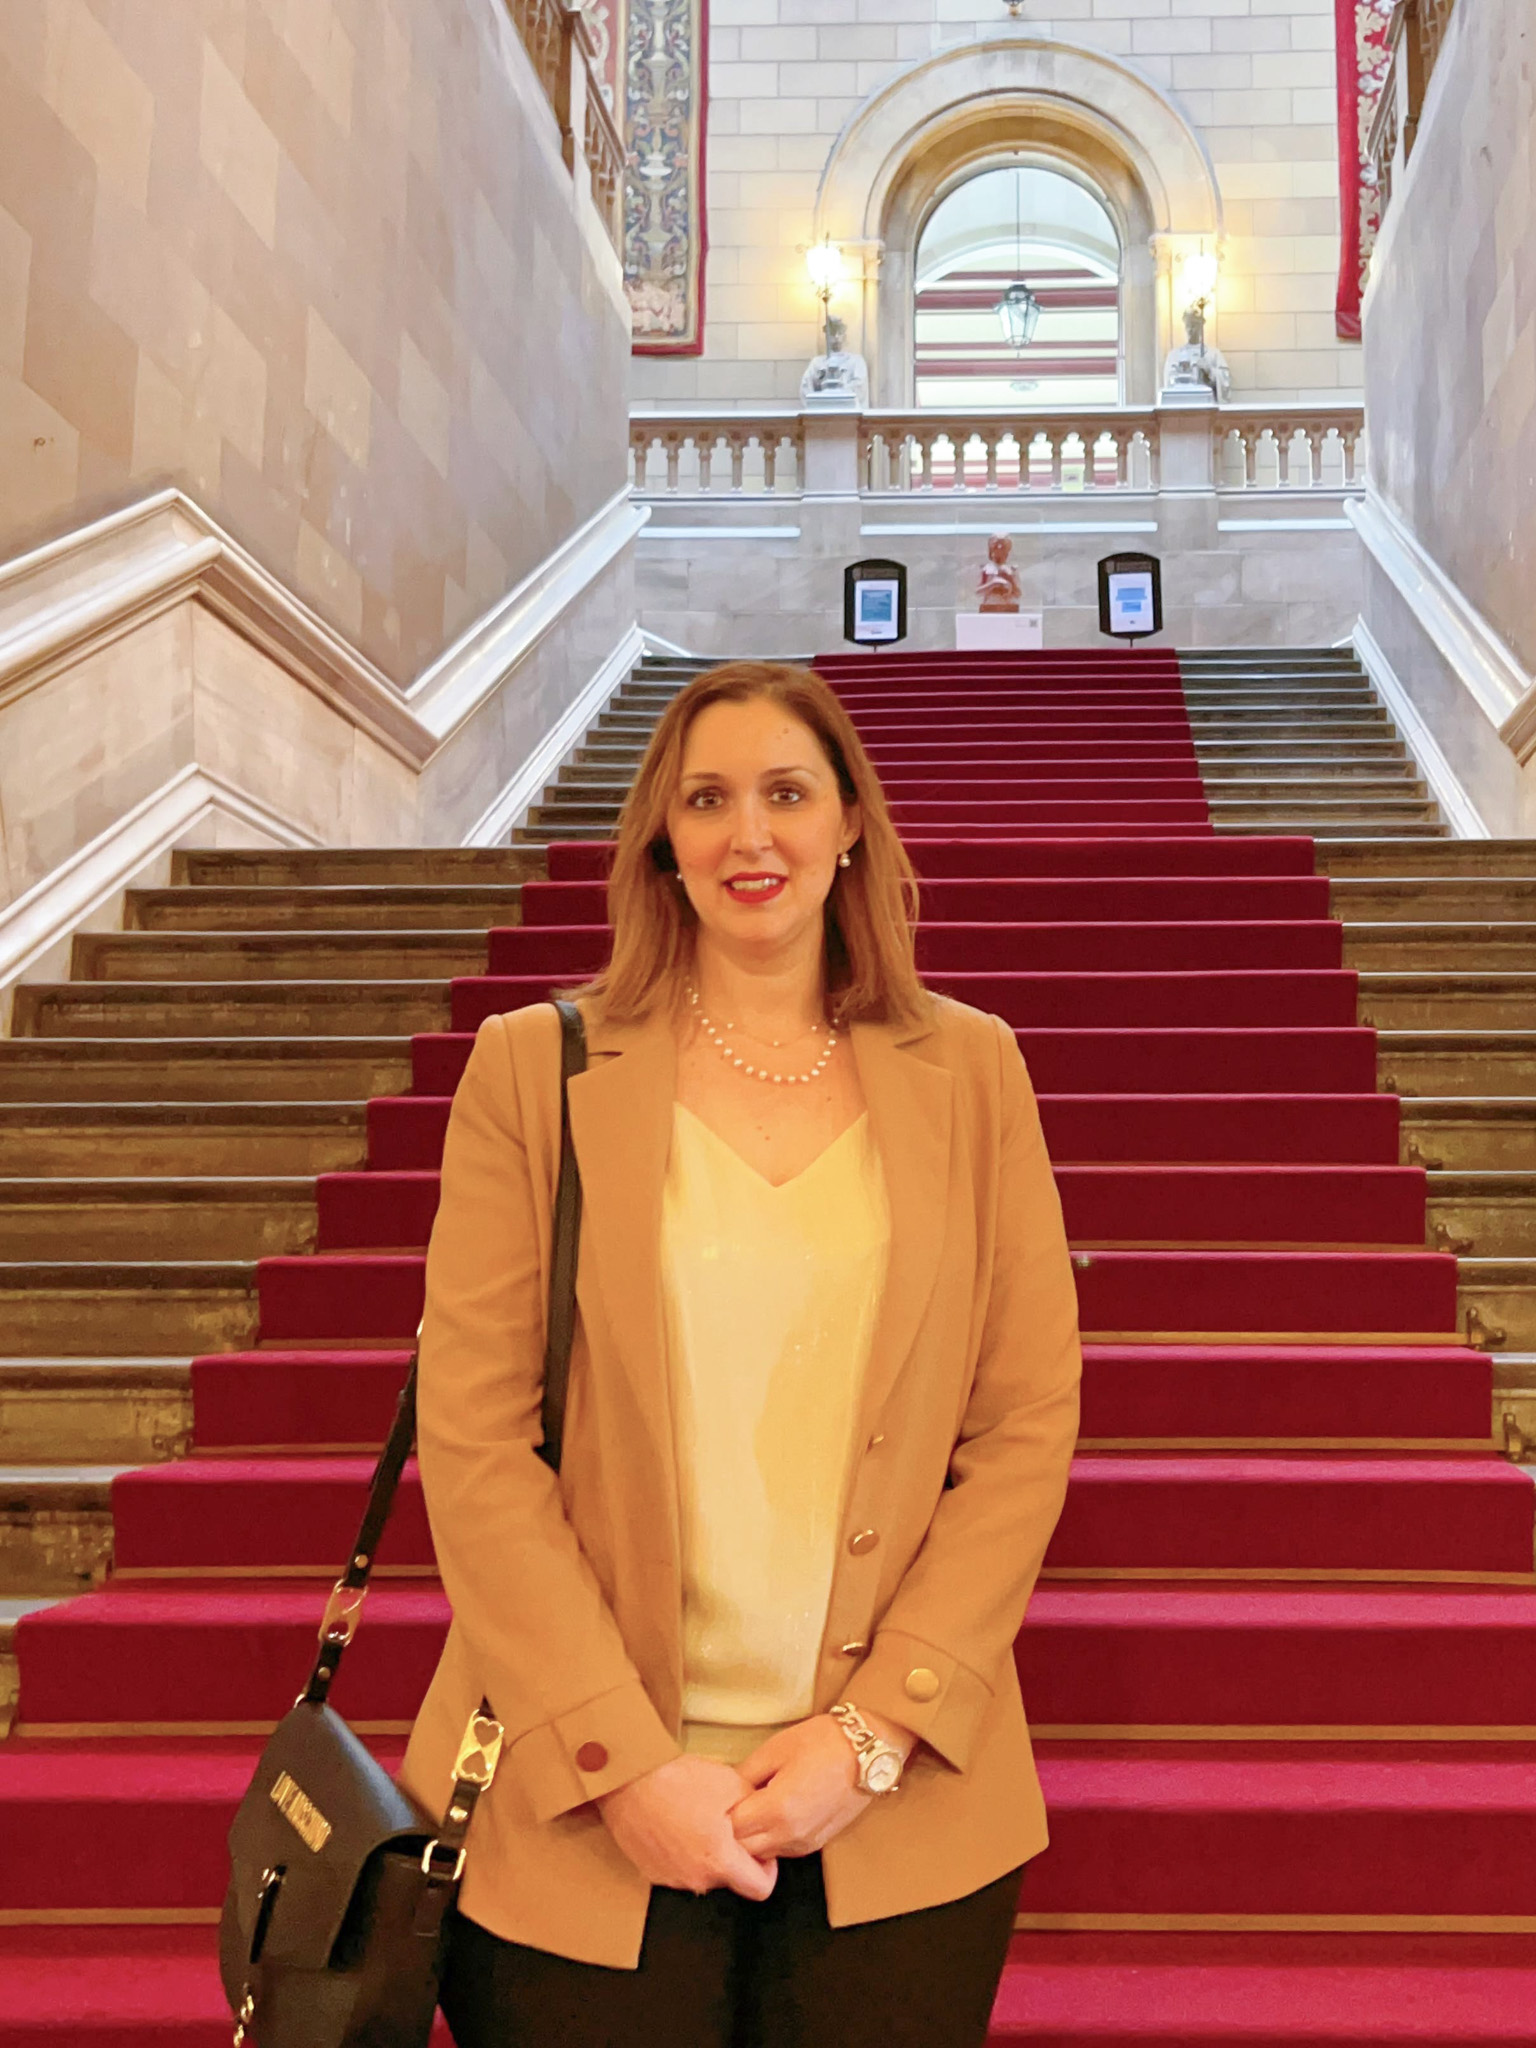 A woman stands on the grand stairway of a historic building.